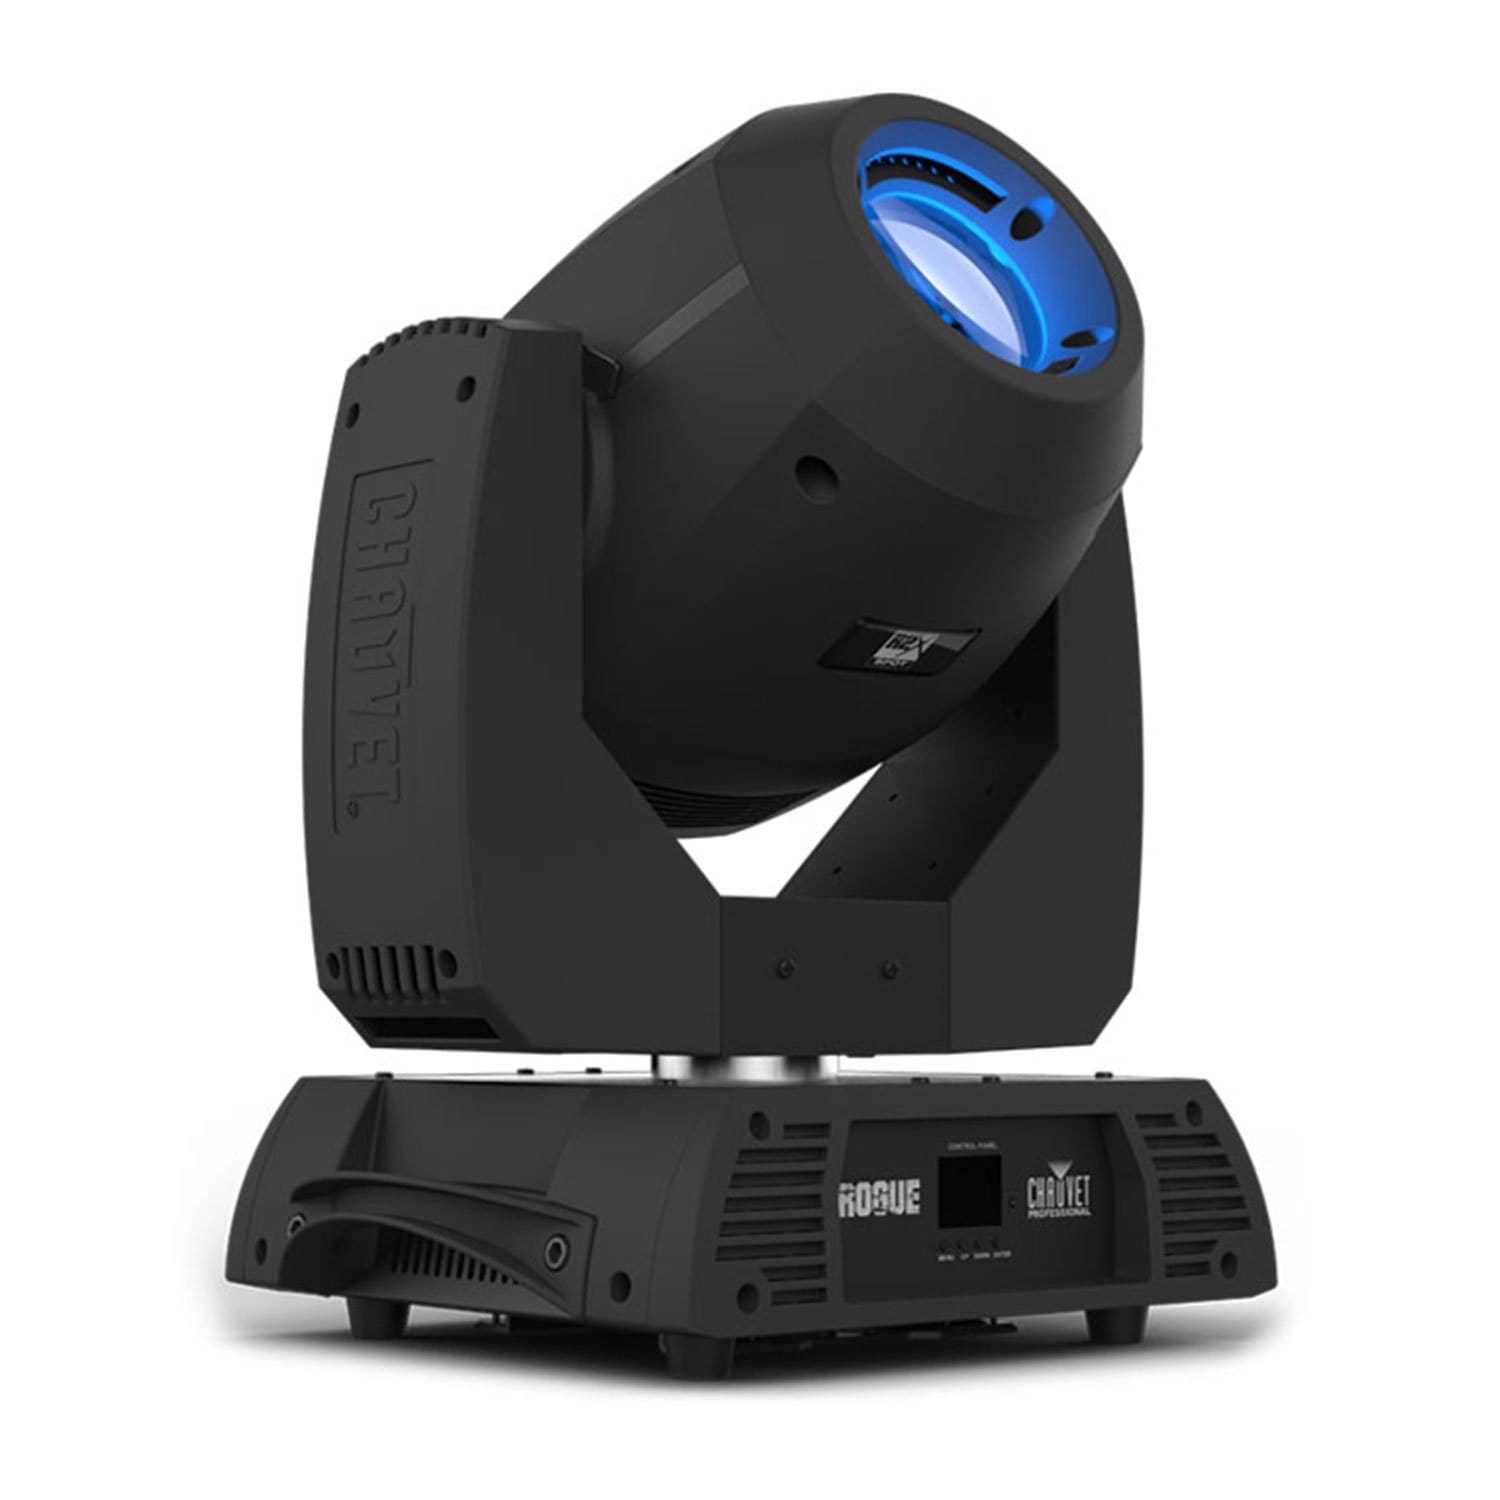 Chauvet Rogue R2X Spot LED Moving Head Light - PSSL ProSound and Stage Lighting